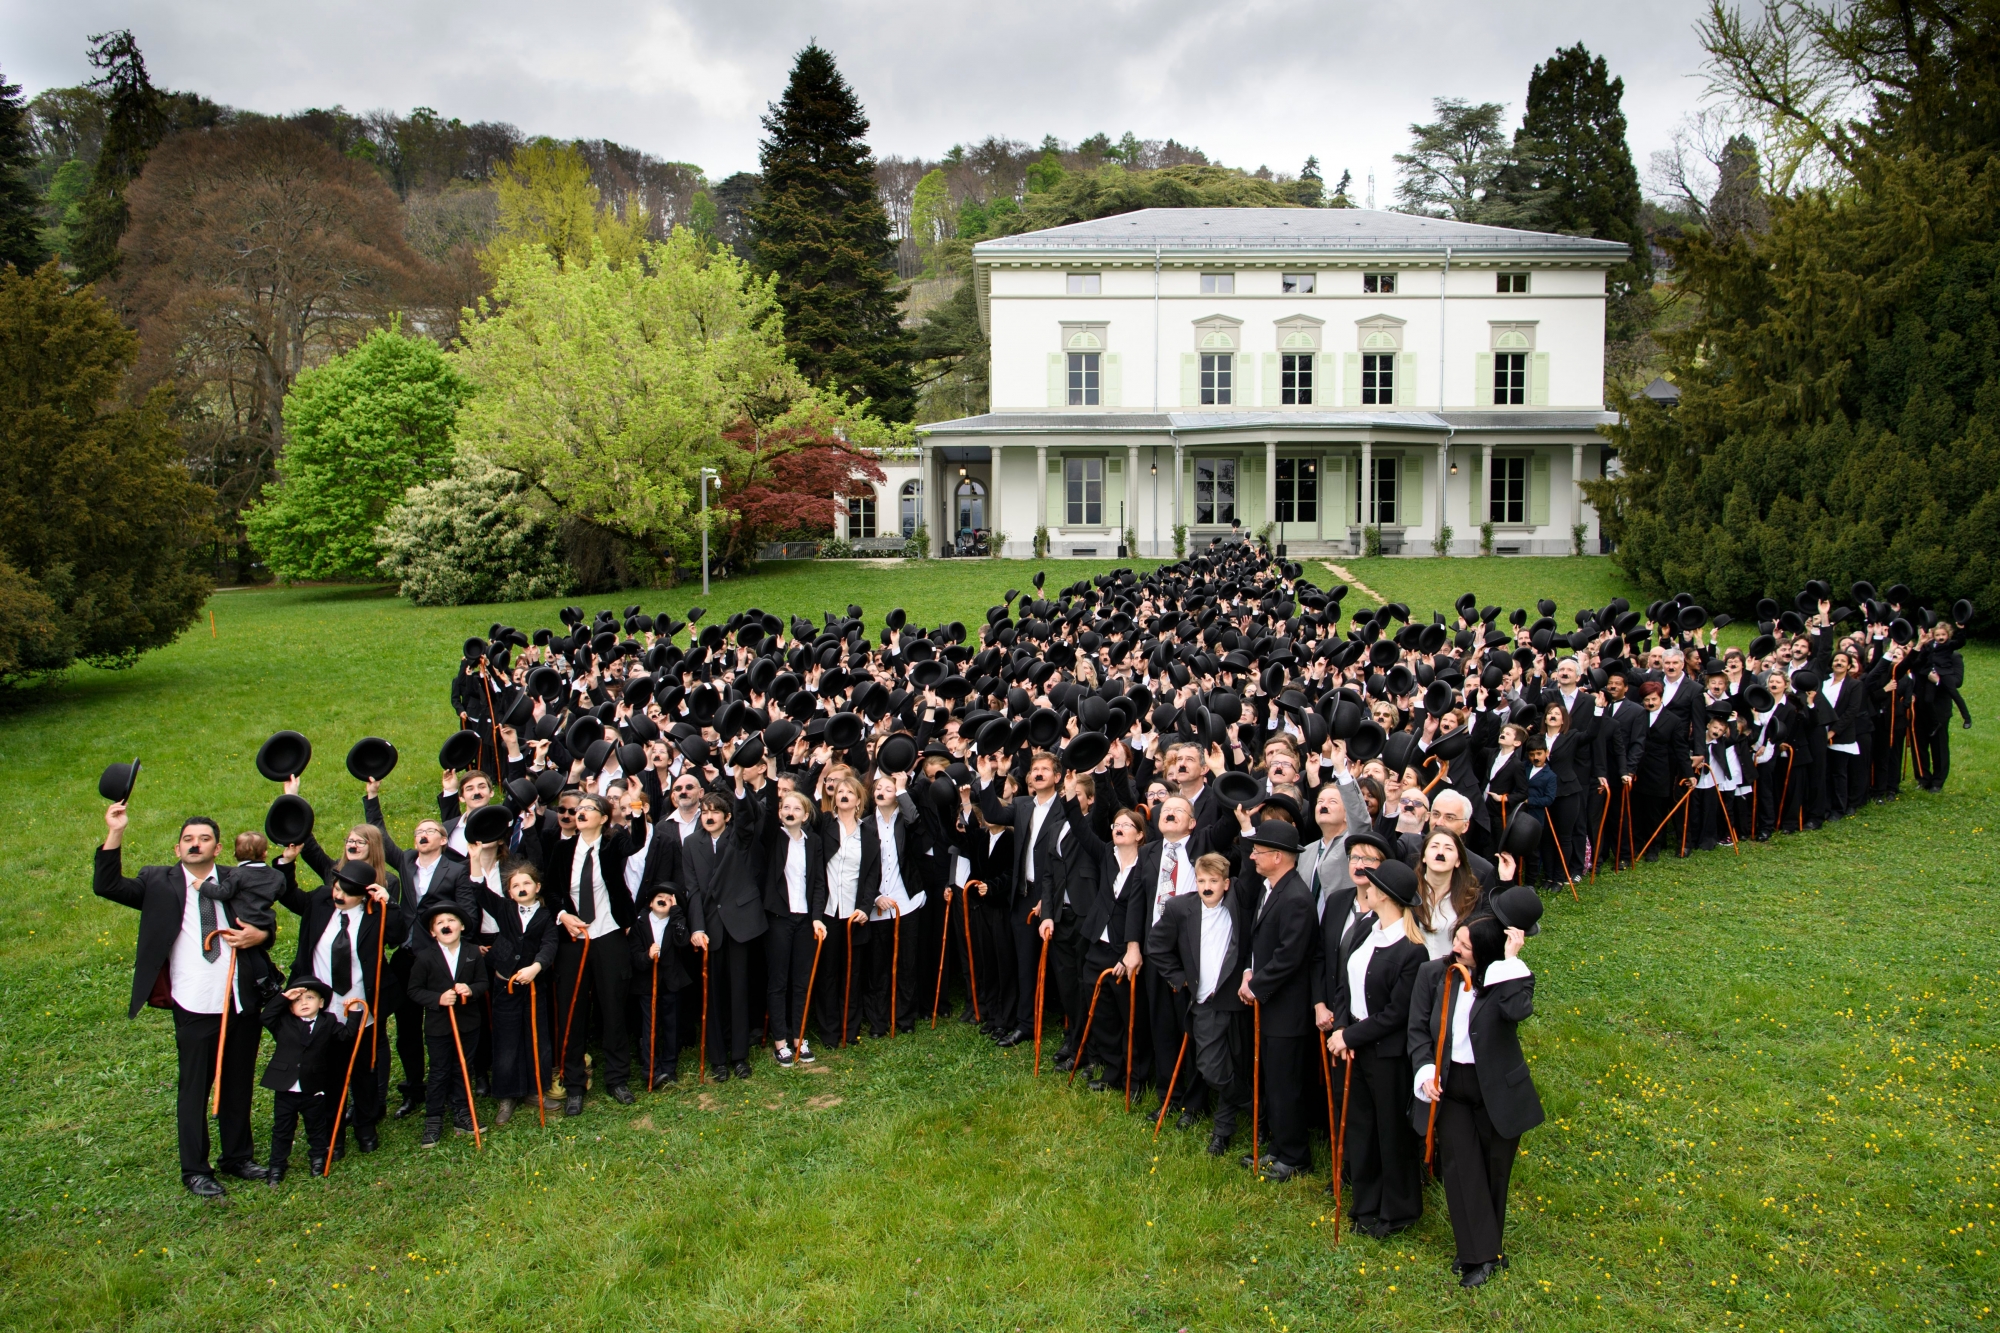 662 peoples dressed in Charlie Chaplin pose for a group photo in front of the Manoir de Ban during an attempt of the world's largest gathering of people dressed as The Tramp on the occasion of Charlie Chaplin's birthday, and to celebrate the first year of the museum "Chaplin's World by Grevin", in Corsier, above Vevey, Switzerland, Sunday, April 16, 2017. Chaplin's World, a museum on English comic actor, filmmaker, and composer Charlie Chaplin, is located in a 14 hectare park of lush trees, it occupies the mansion where the Chaplin family lived the last 25 years of Charly Chaplin's life. (KEYSTONE/Laurent Gillieron) SWITZERALND WORLD RECORD MUSEUM CHARLIE CHAPLIN